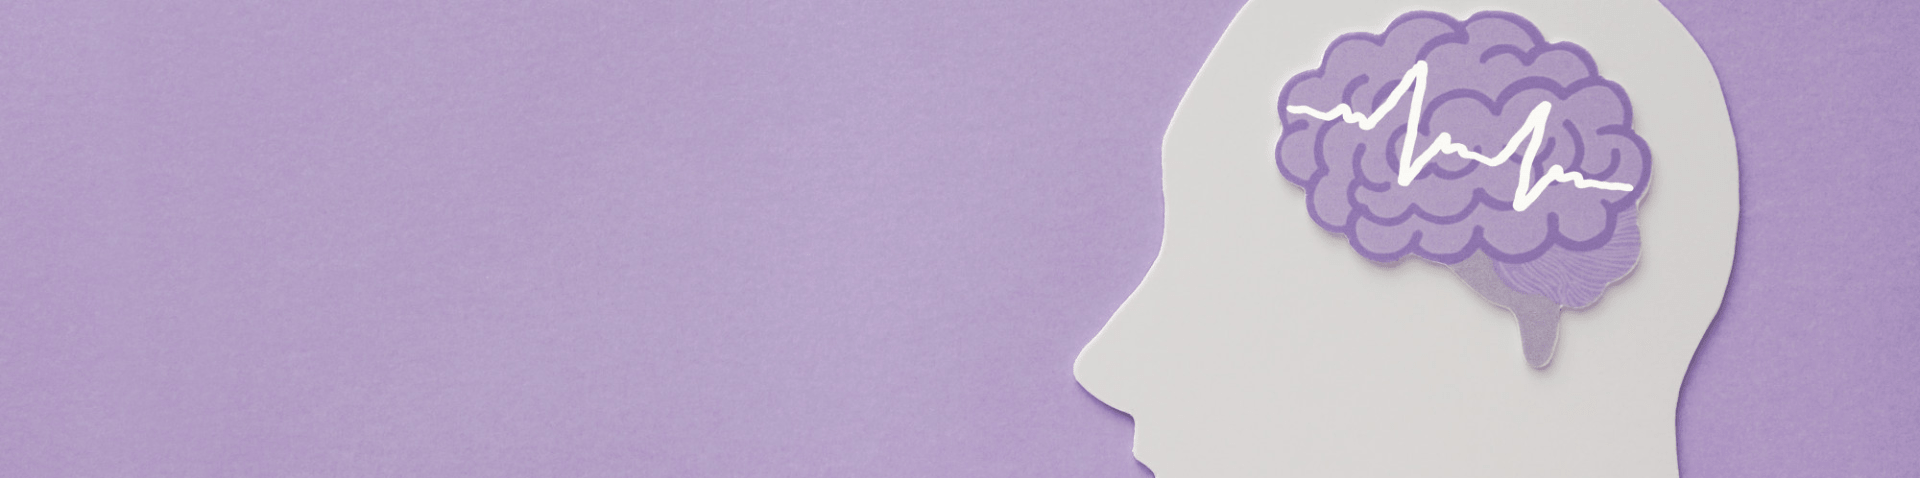 encephalography-brain-paper-cutout-on-purple-background-epilepsy-and-alzheimer-awareness-seizure-disorder-mental-health-concept-min-1.png